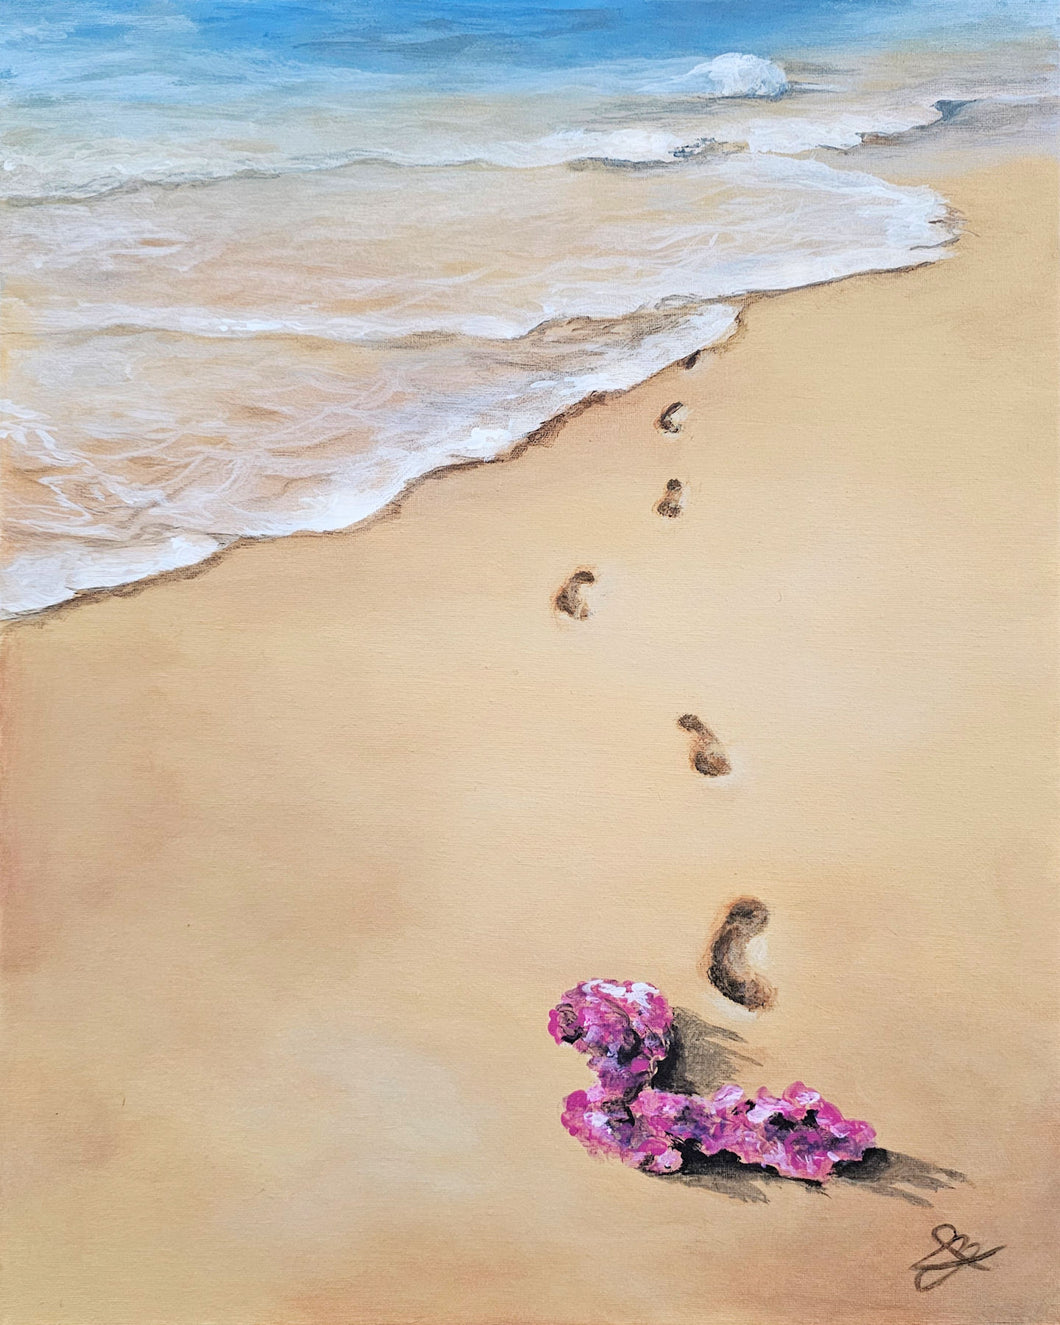 Adult Footprints in the sand Crust & Canvas Event June 14th 6pm-8pm